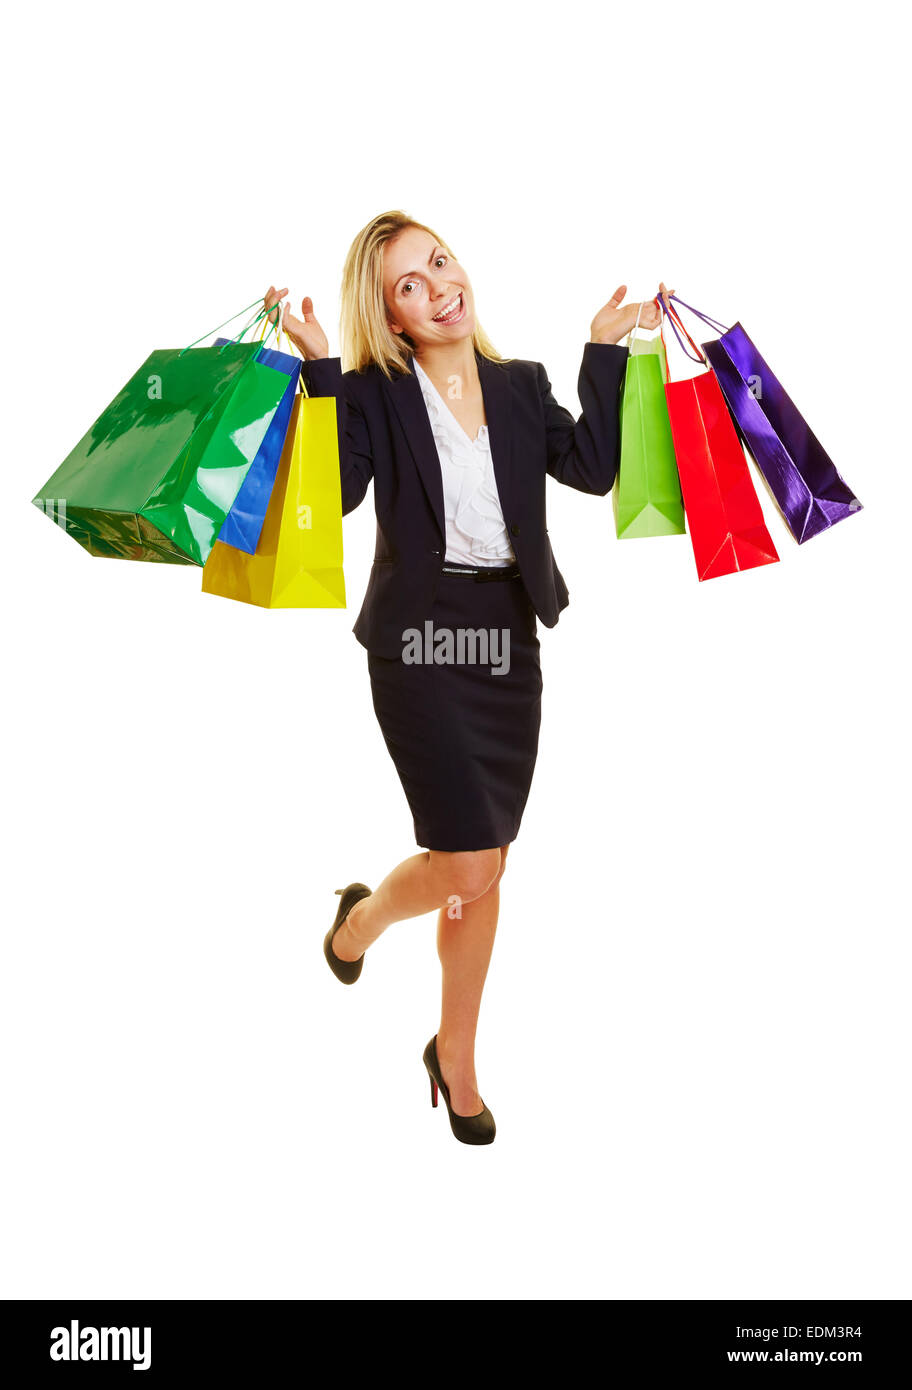 Happy young woman with many colorful shopping bags Stock Photo